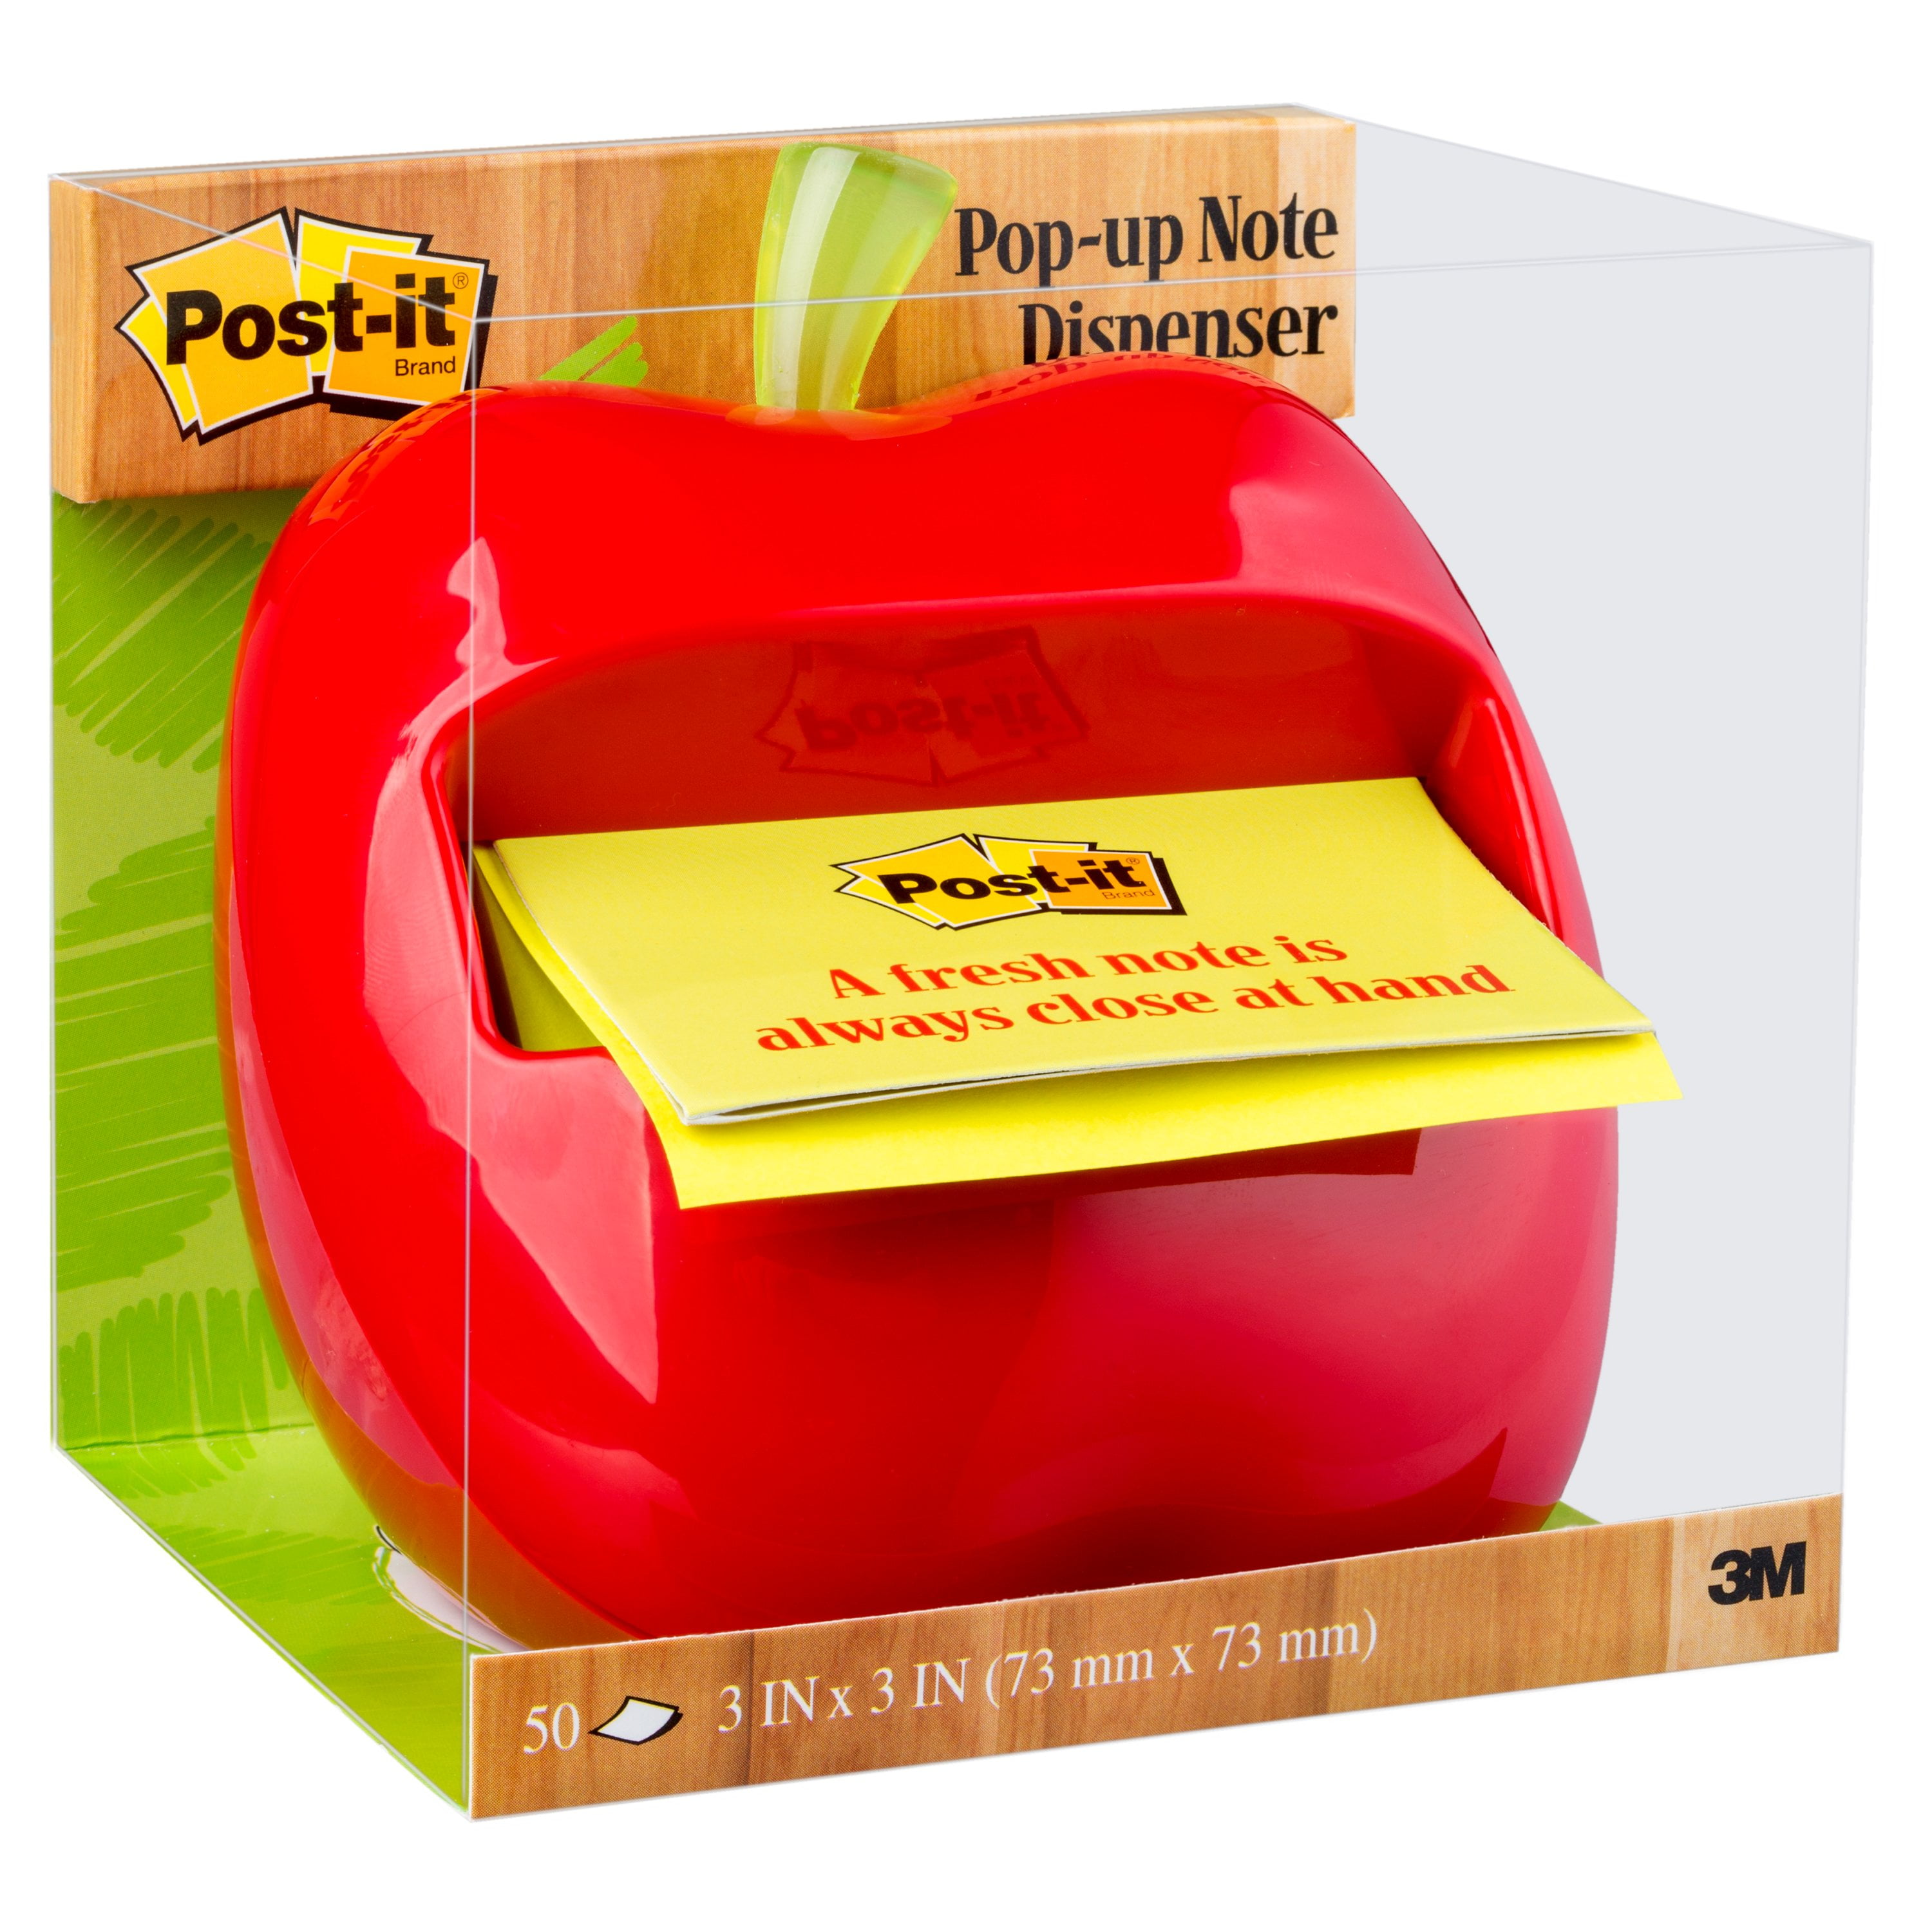 Apple Shaped Dispenser APL-330 Includes 1 Canary Yellow Note Post-it Pop-up Notes Dispenser for 3 in x 3 in Notes 